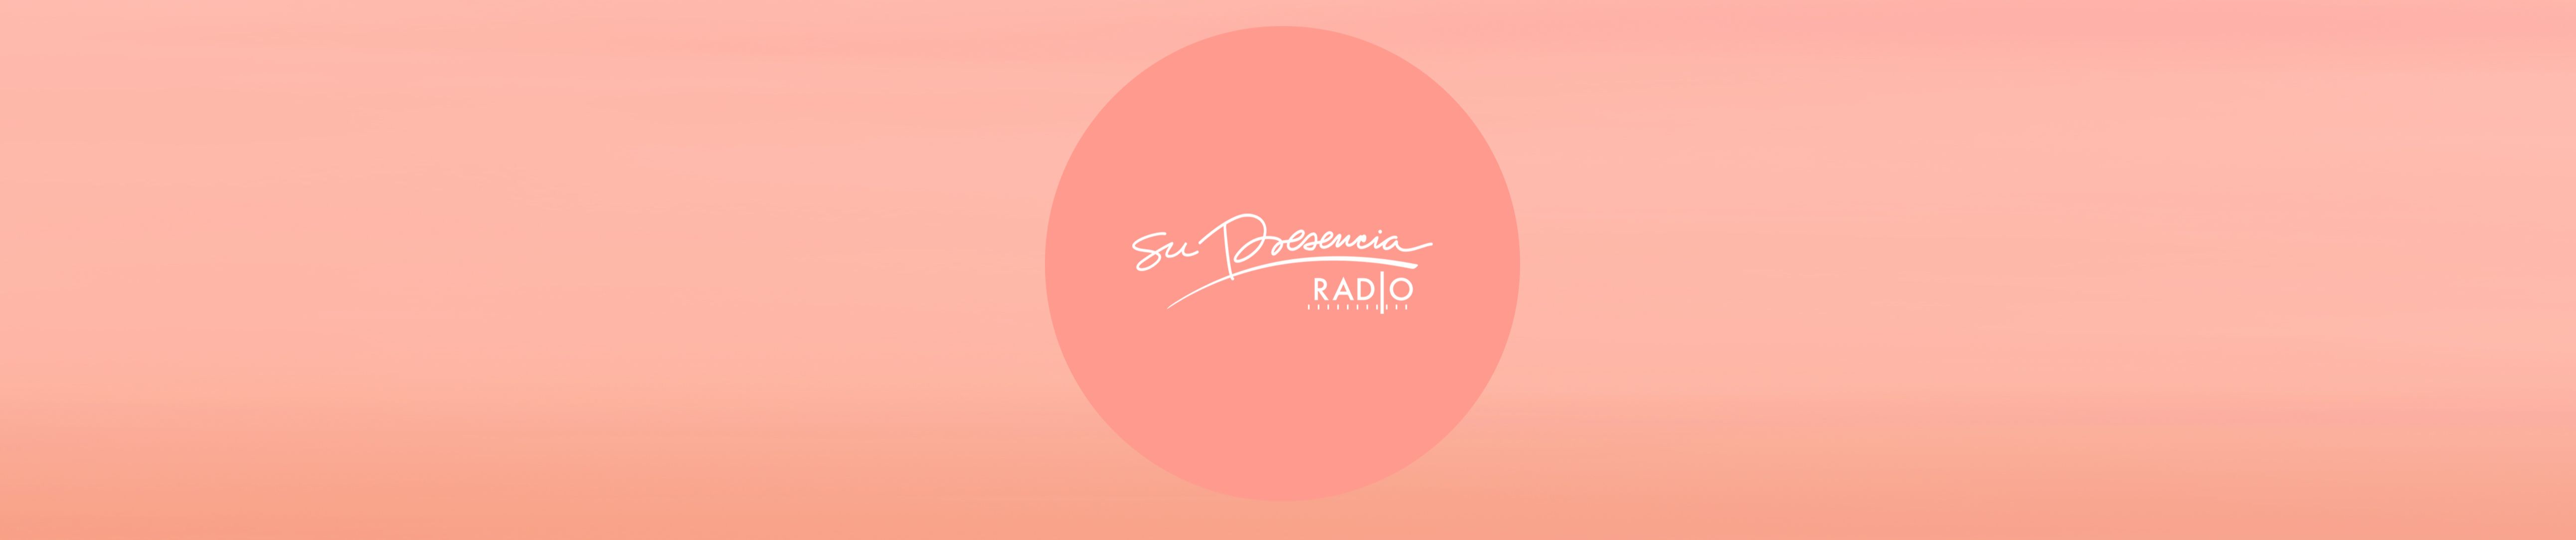 Stream Su Presencia Radio music | Listen to songs, albums, playlists for  free on SoundCloud